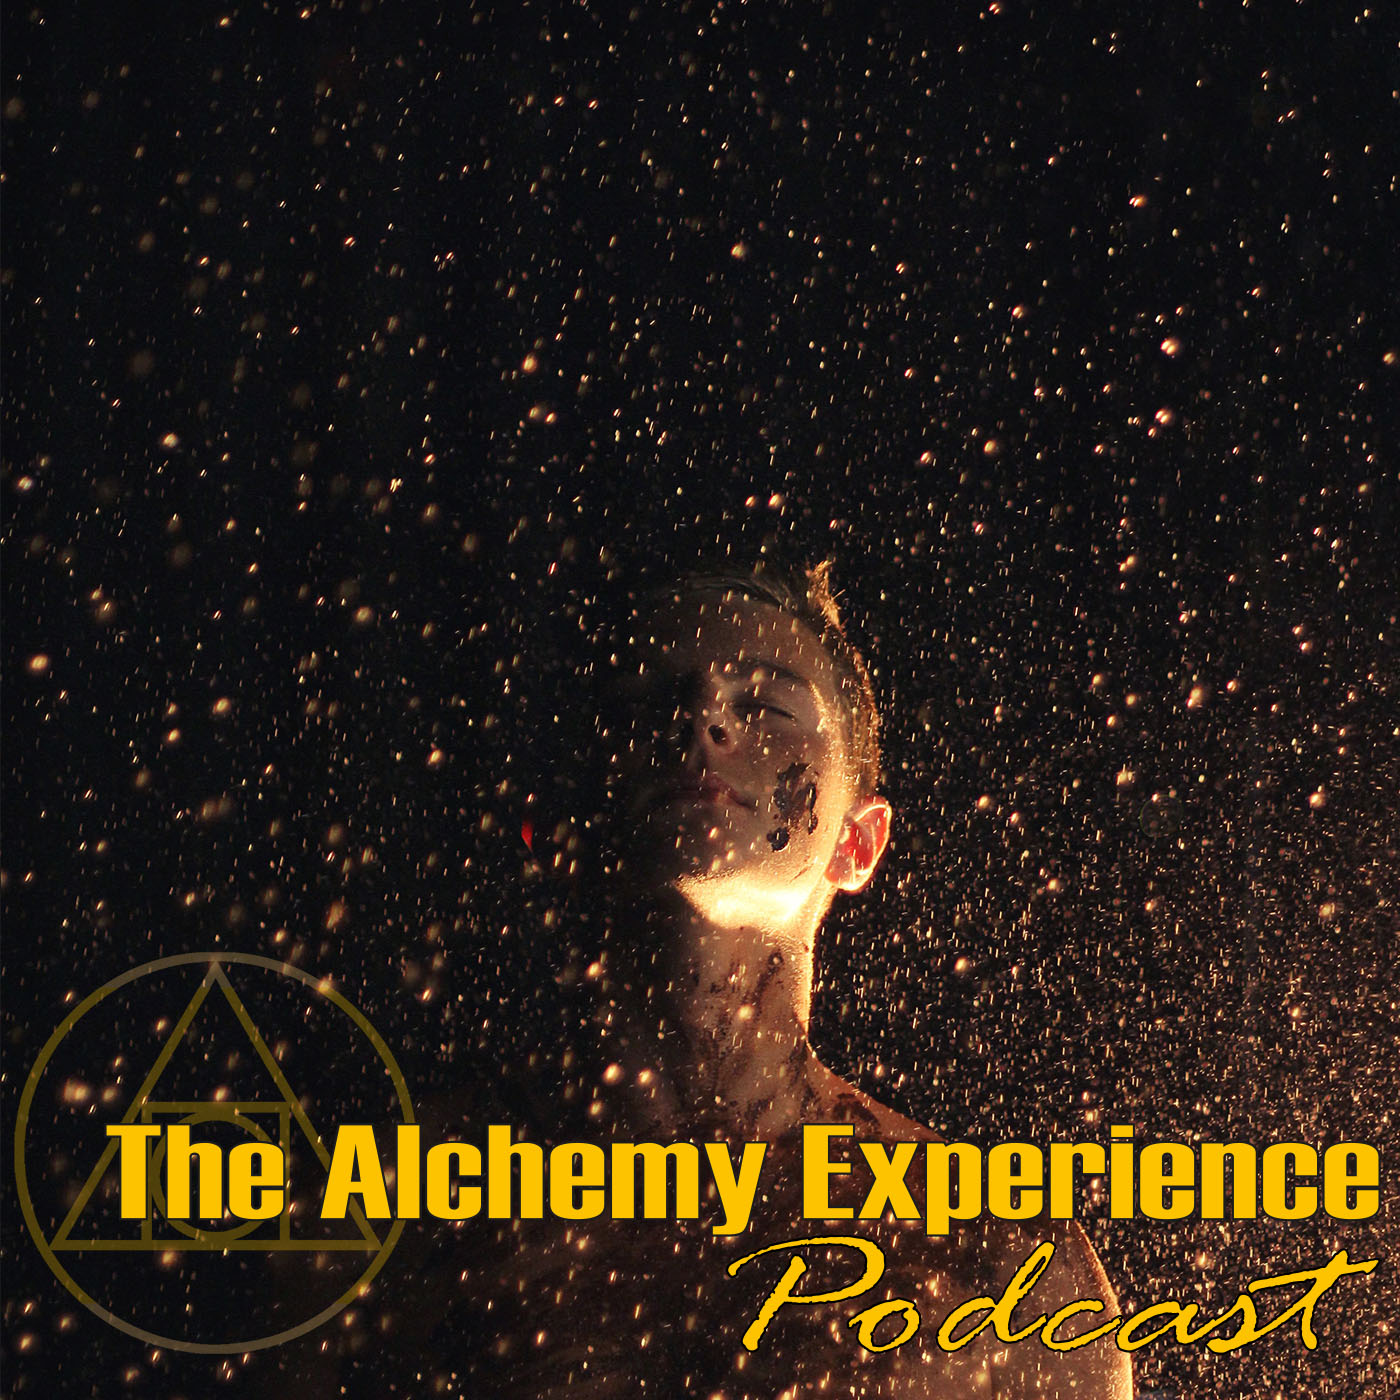 Artwork for The Alchemy Experience